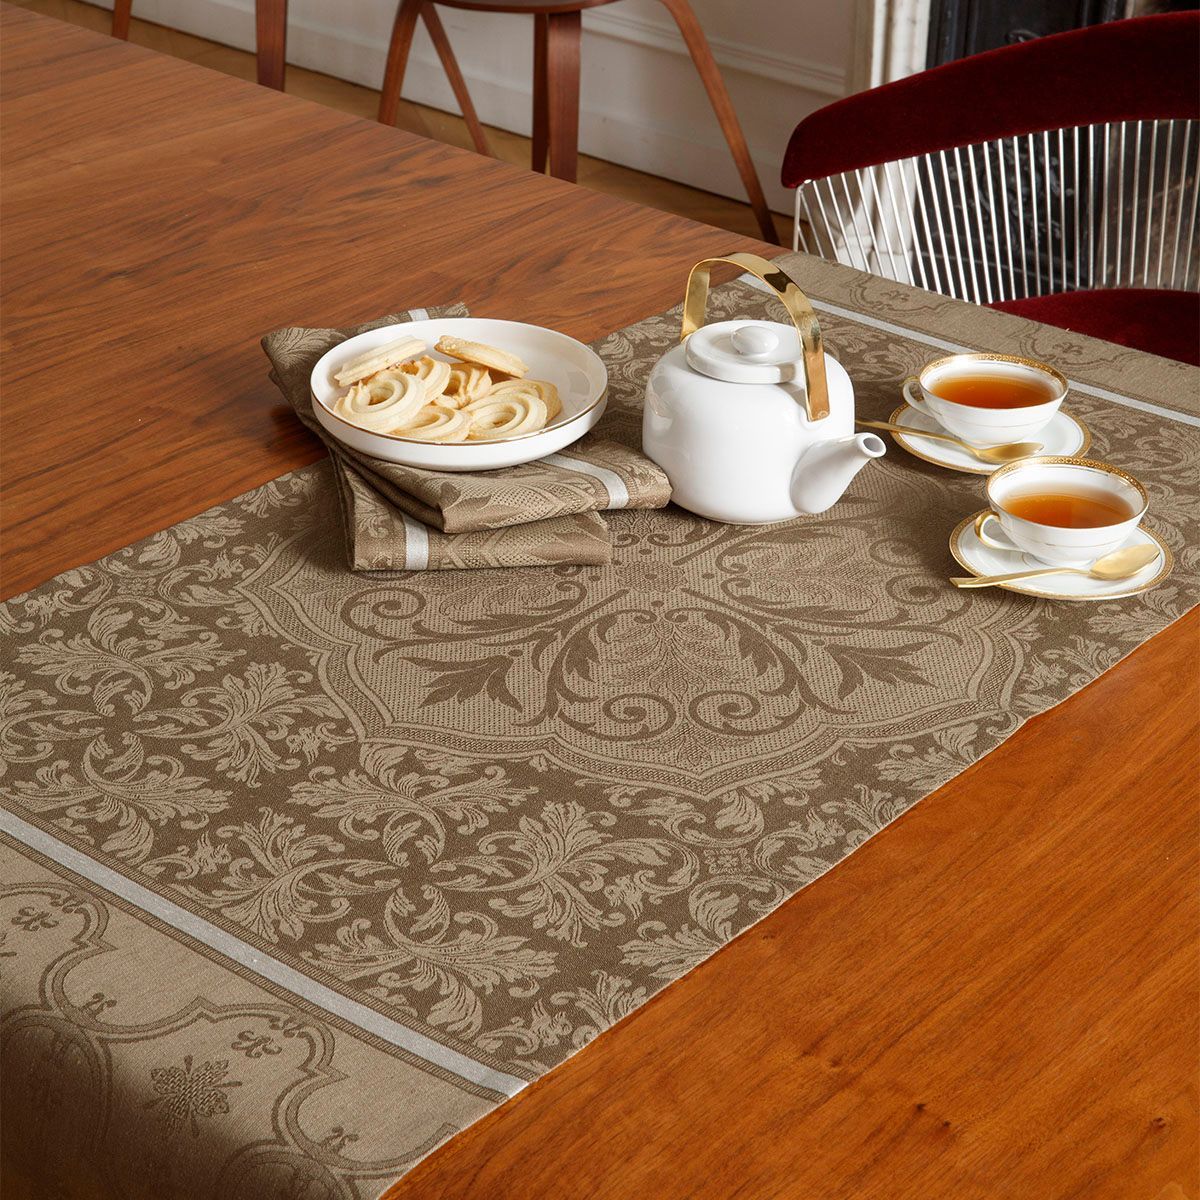 Fig Linens - Armoiries Brown Table Linens by Le Jacquard Français - Table Runner